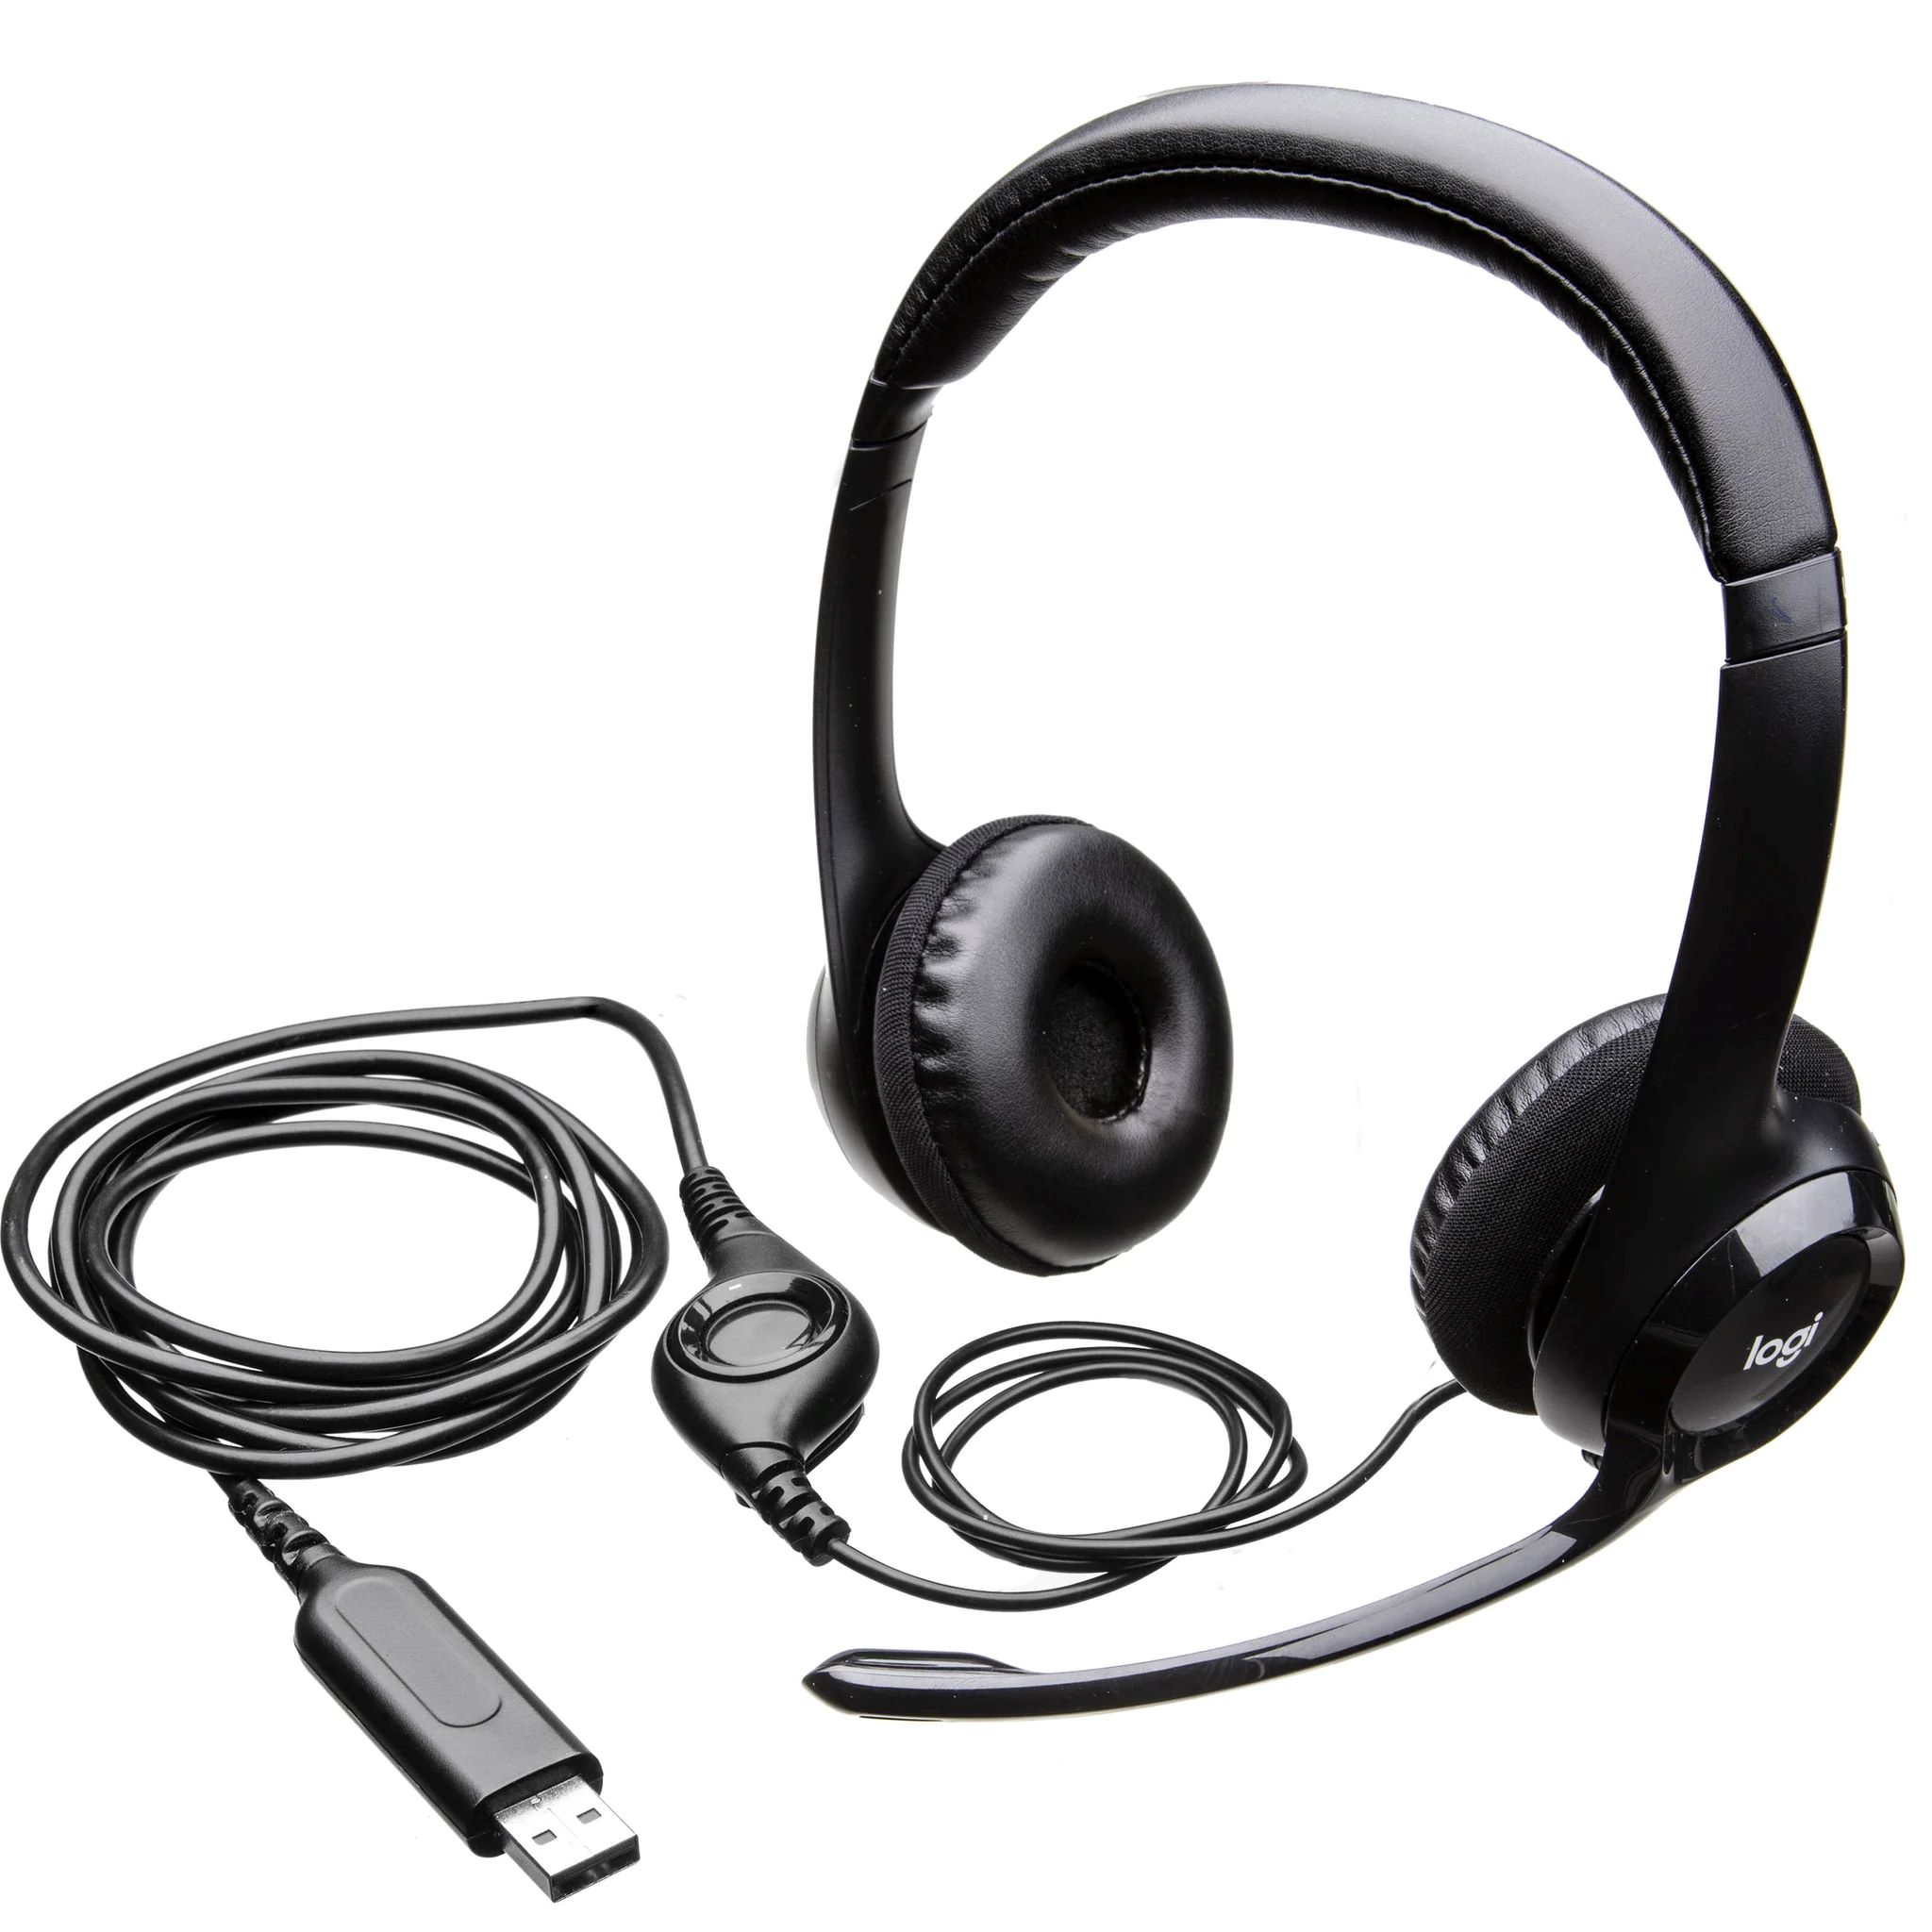 10 Amazing Logitech Usb Headset H390 With Noise Cancelling Mic for 2023